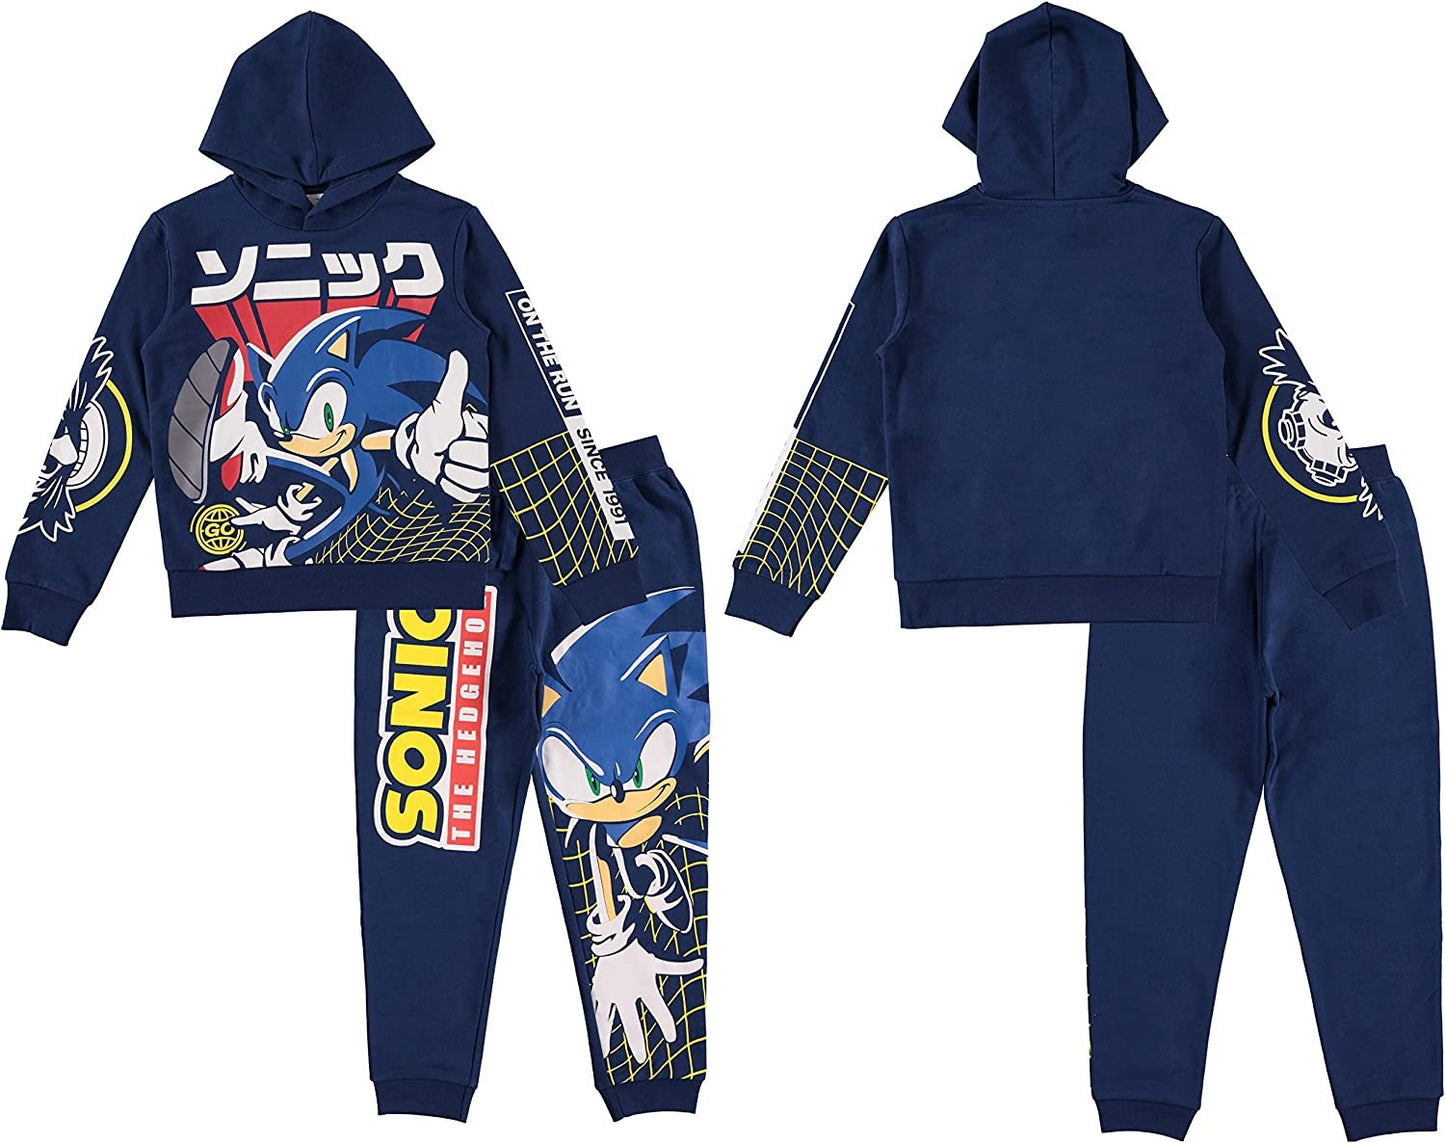 FREEZE Boys Sonic Hoodie and Jogger Sweatpants - Sonic The Hedgehog Boys 2-Piece Outfit Set sizes 4-16